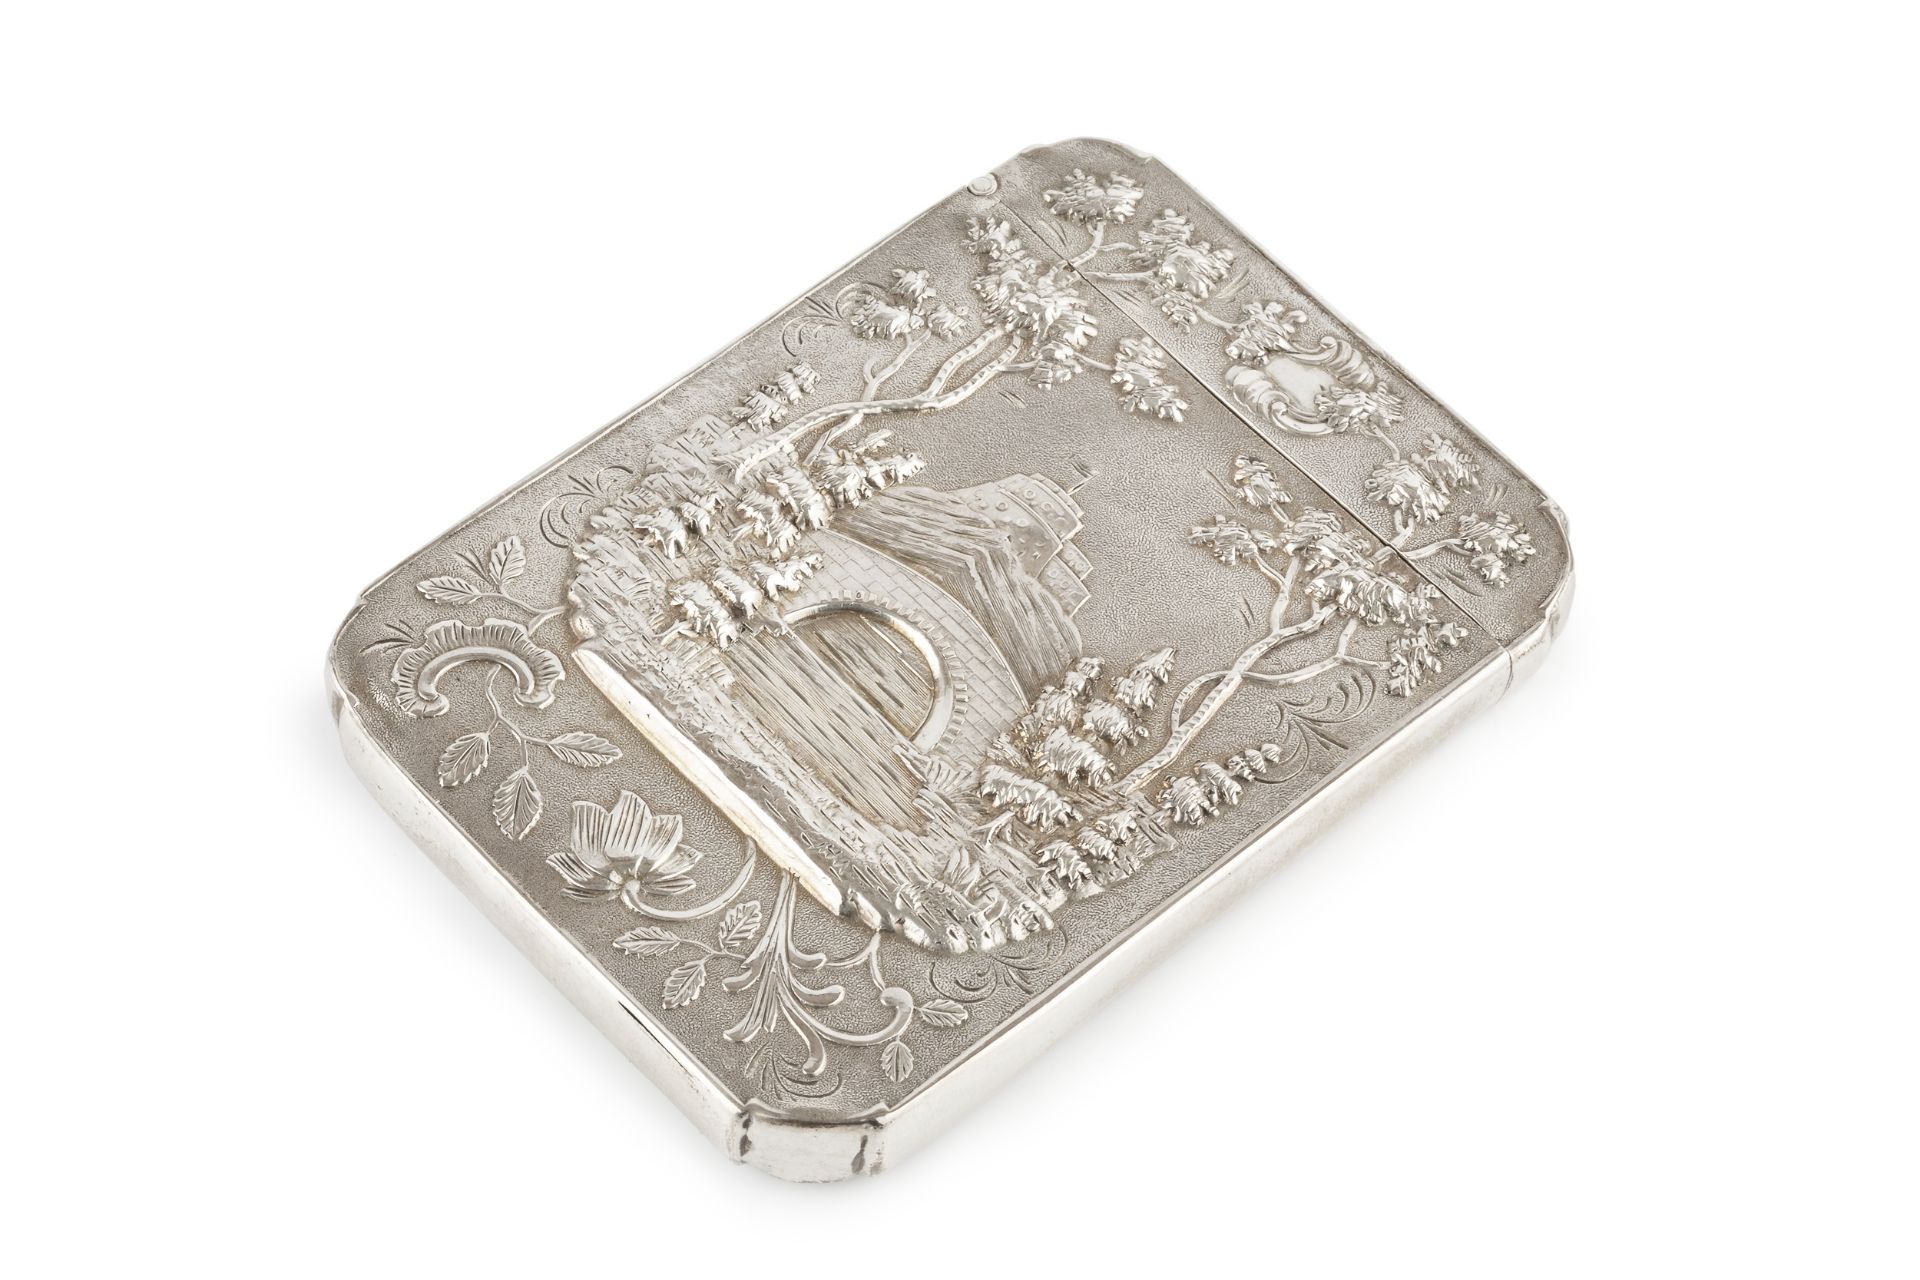 A 19th century silver castle top card case, possibly American, repoussé decorated to one side with a